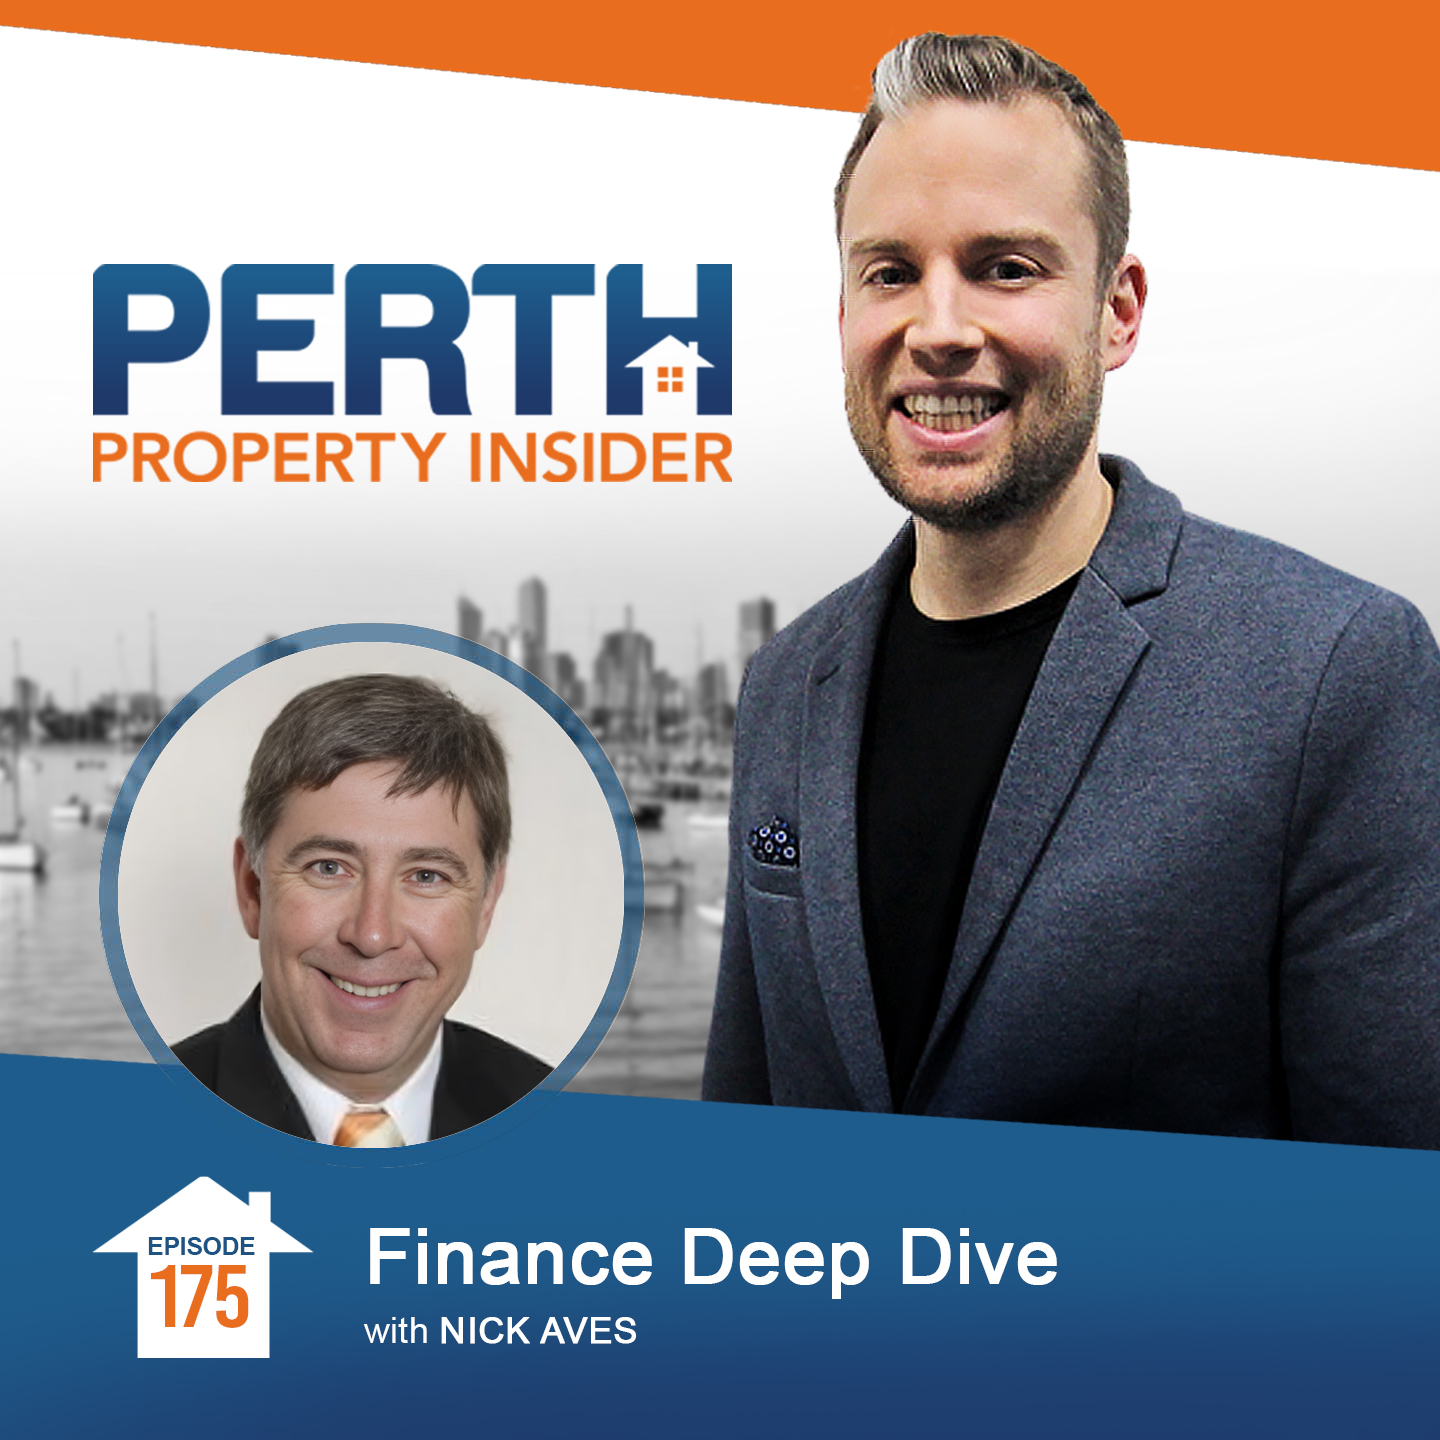 Finance Deep Dive with Nick Aves